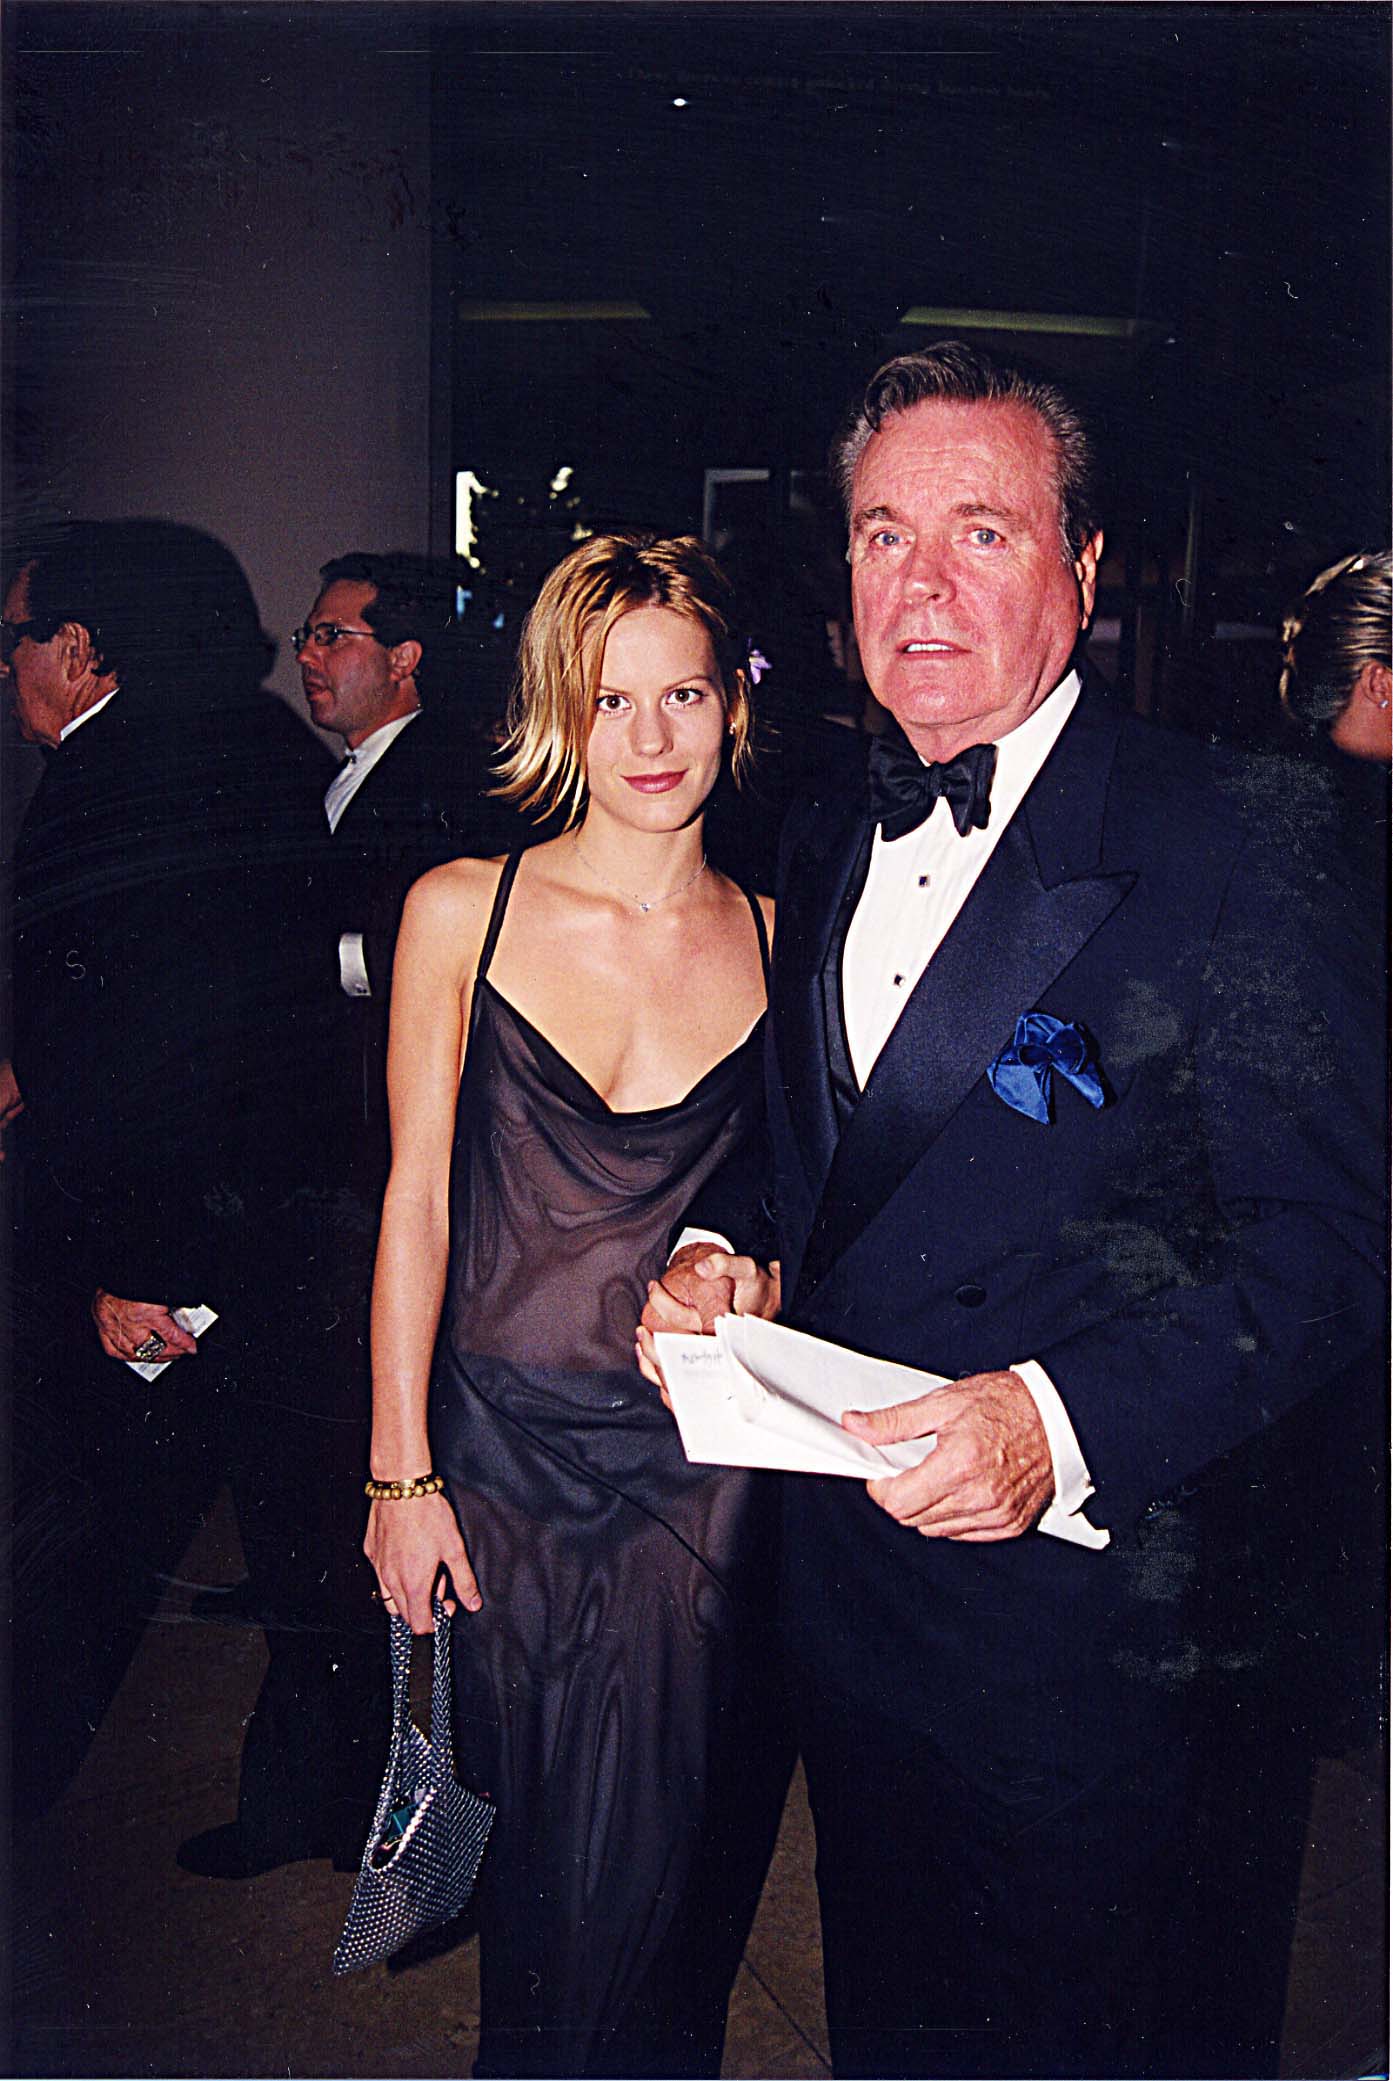 Courtney Brooke Wagner and her father Robert Wagner attend the Achievement Awards on September 6, 1998 ┃Source: Getty Images